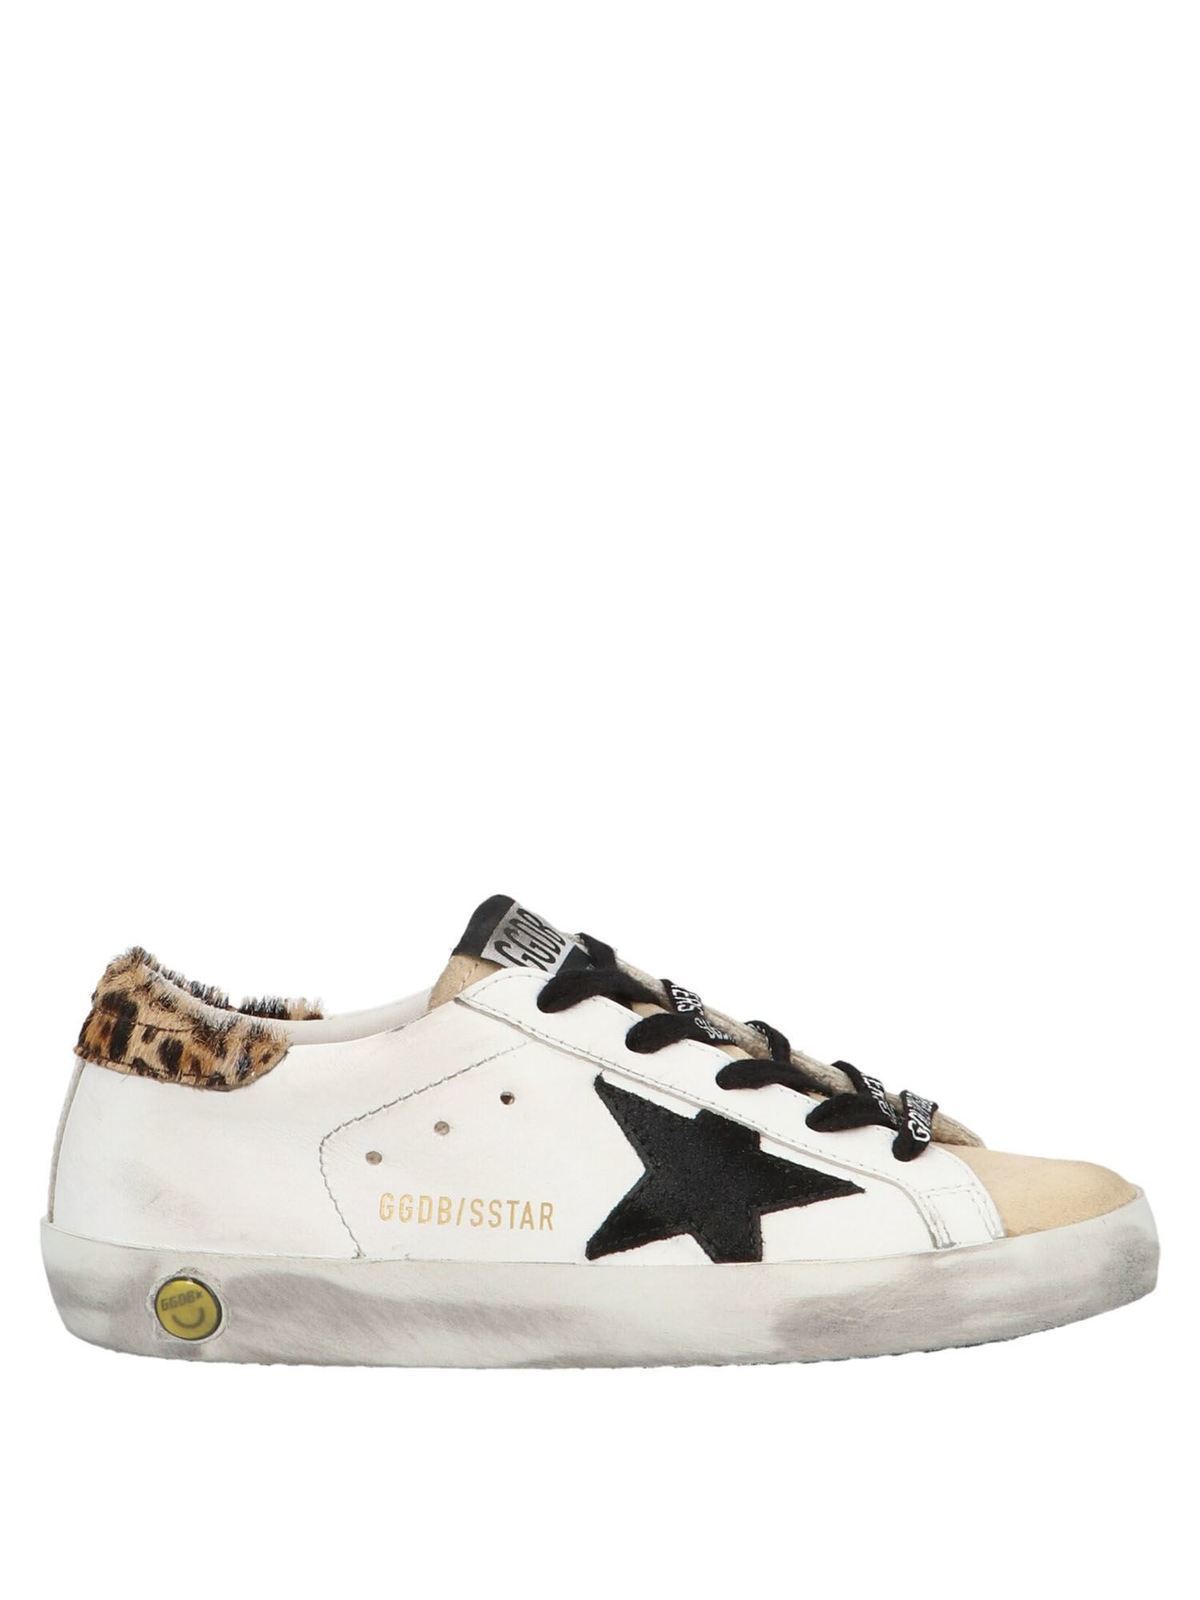 Golden Goose - Super-Star sneakers in white - GYF00101F00119880897